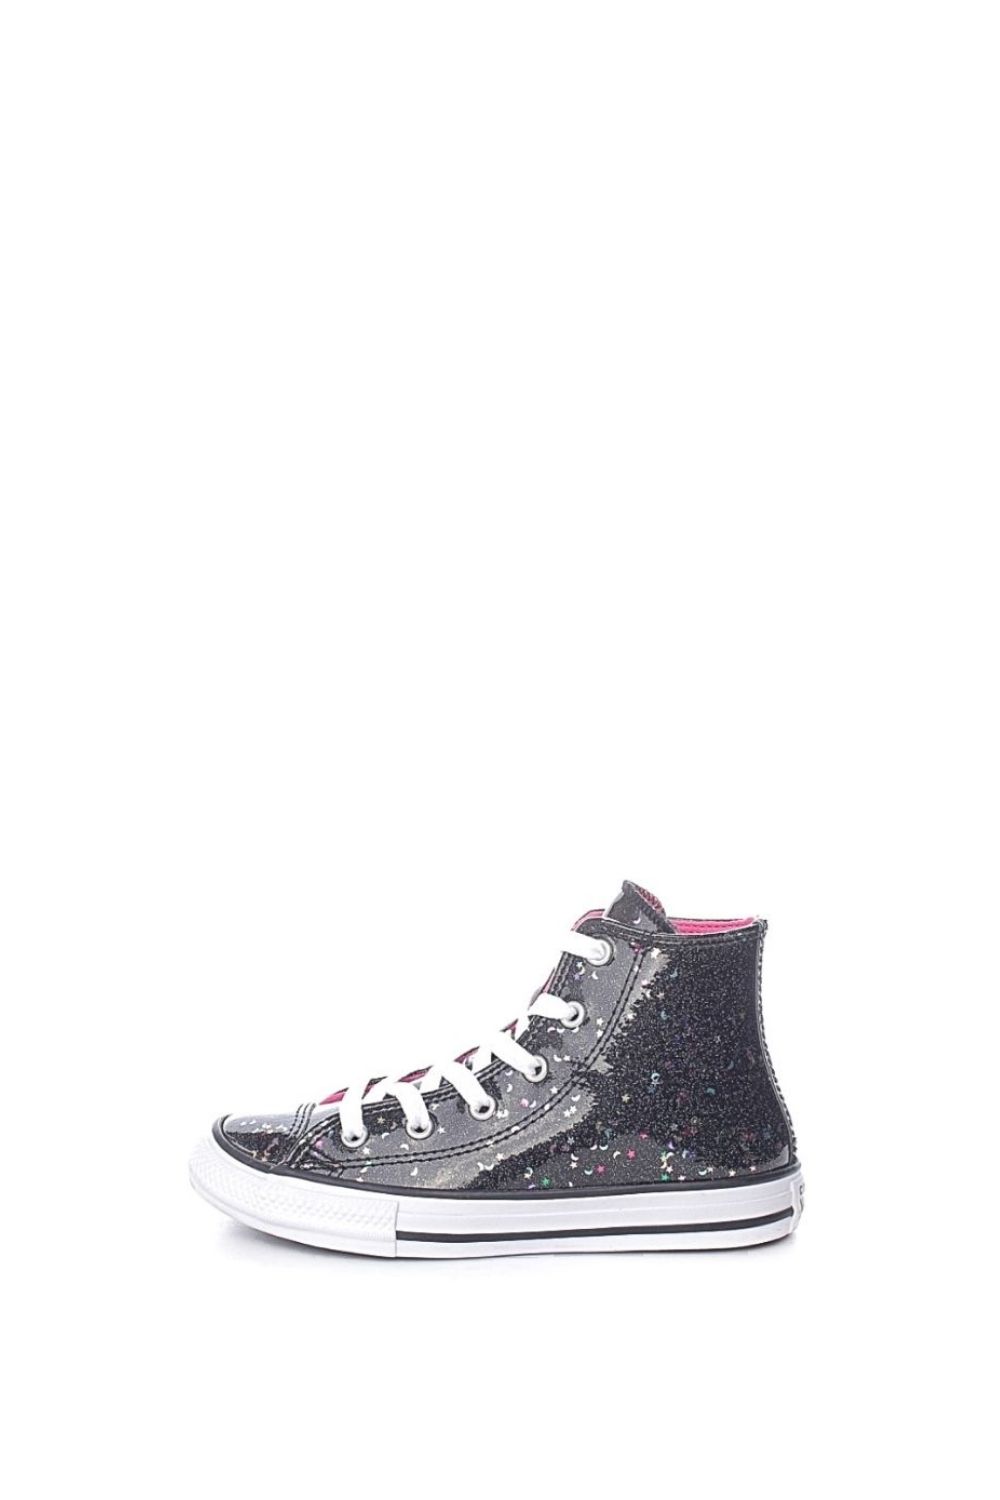 CONVERSE - Παιδικά μποτάκια sneakers CONVERSE CHUCK TAYLOR ALL STAR μαύρα Παιδικά/Girls/Παπούτσια/Sneakers